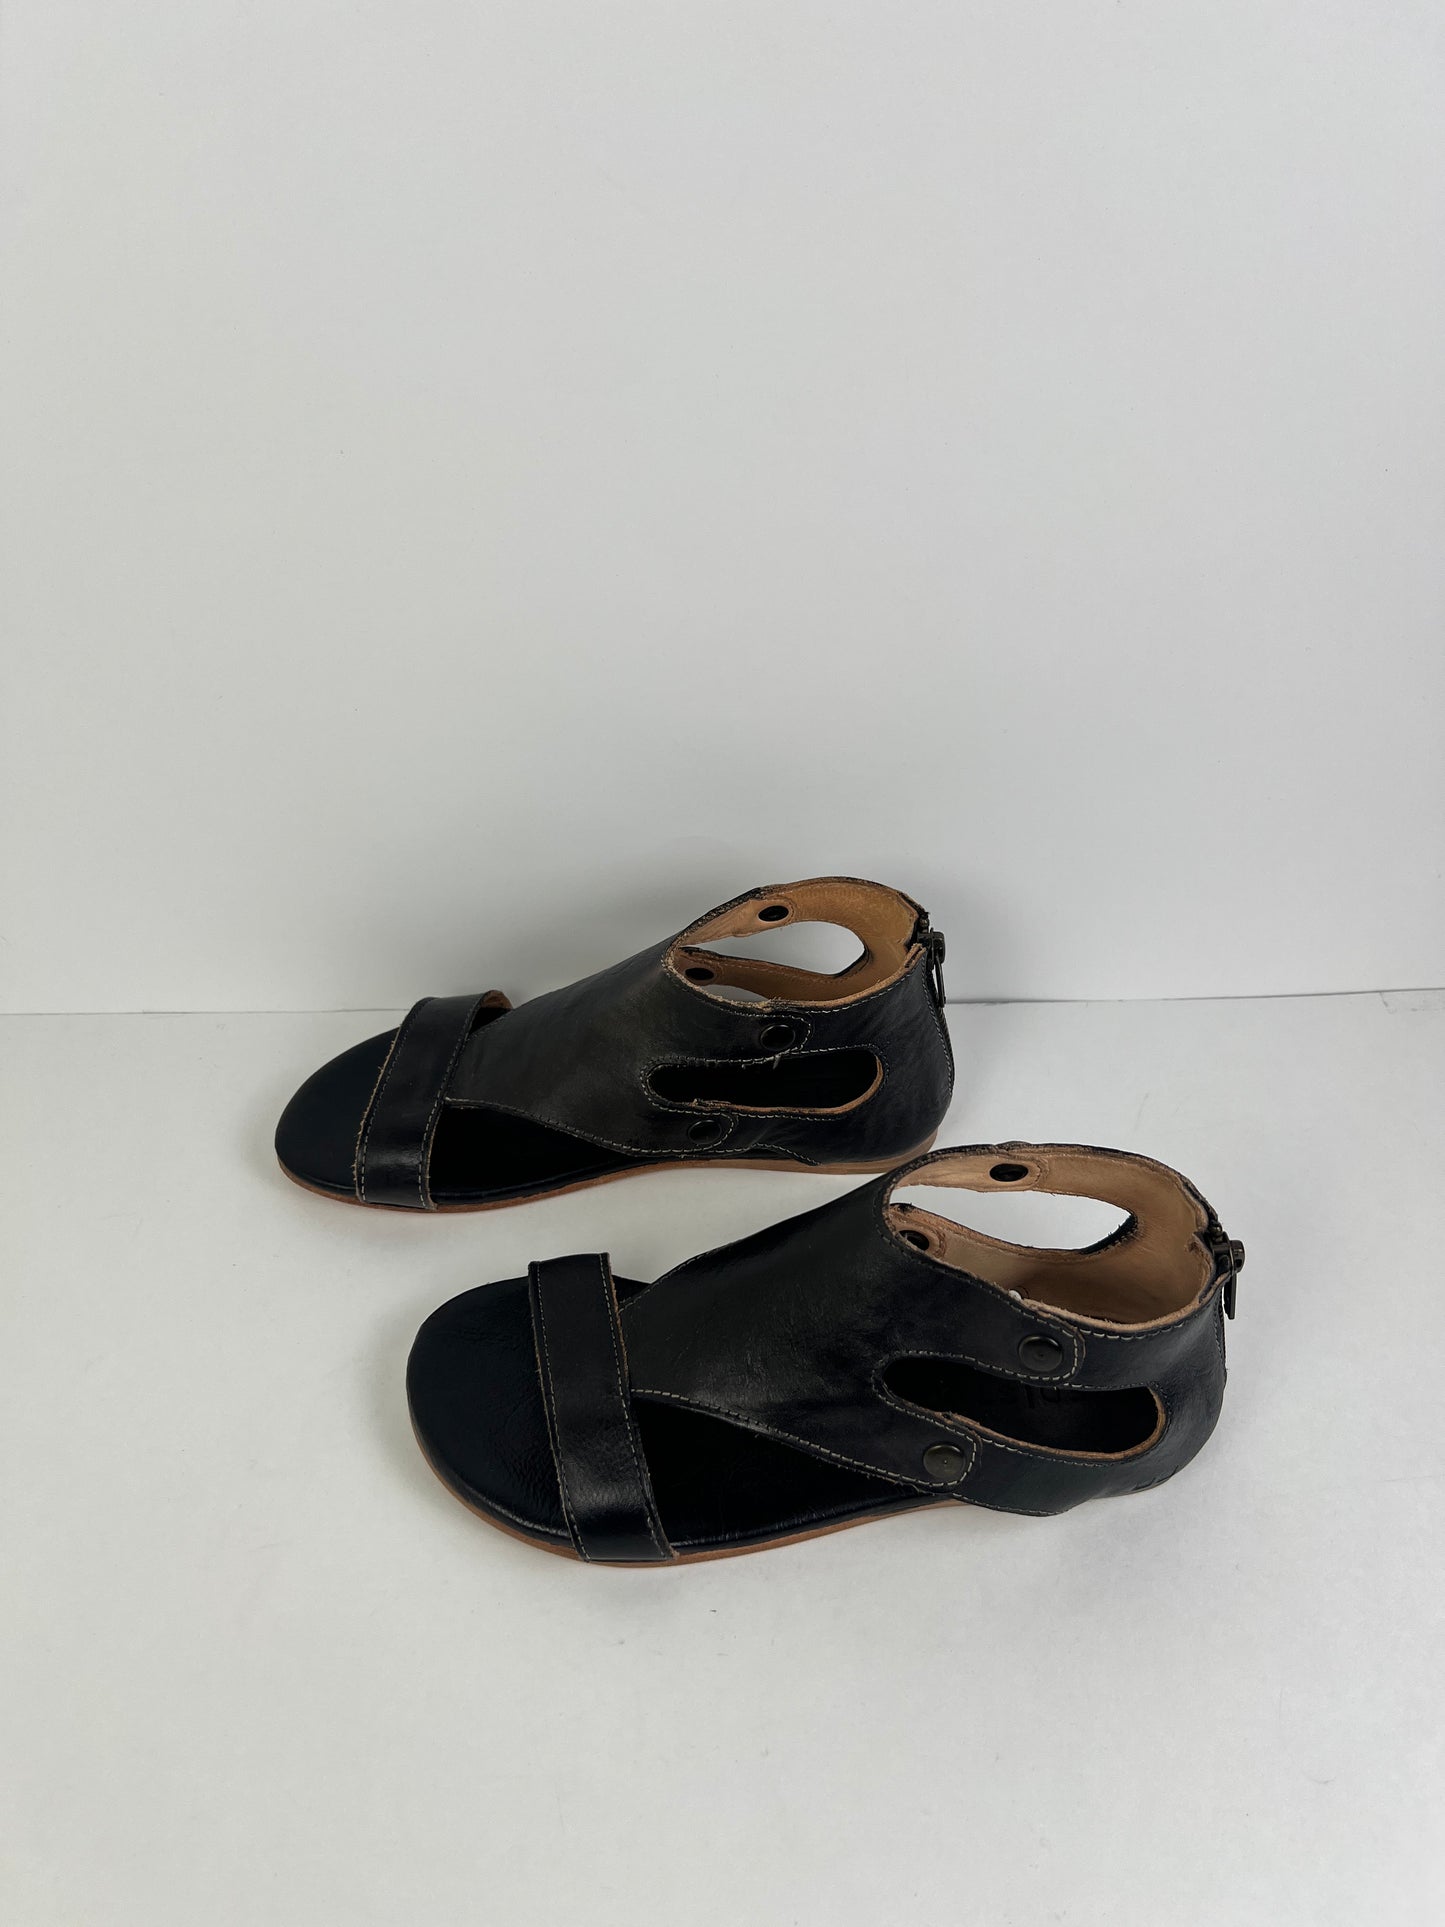 Sandals Flats By Bed Stu  Size: 6